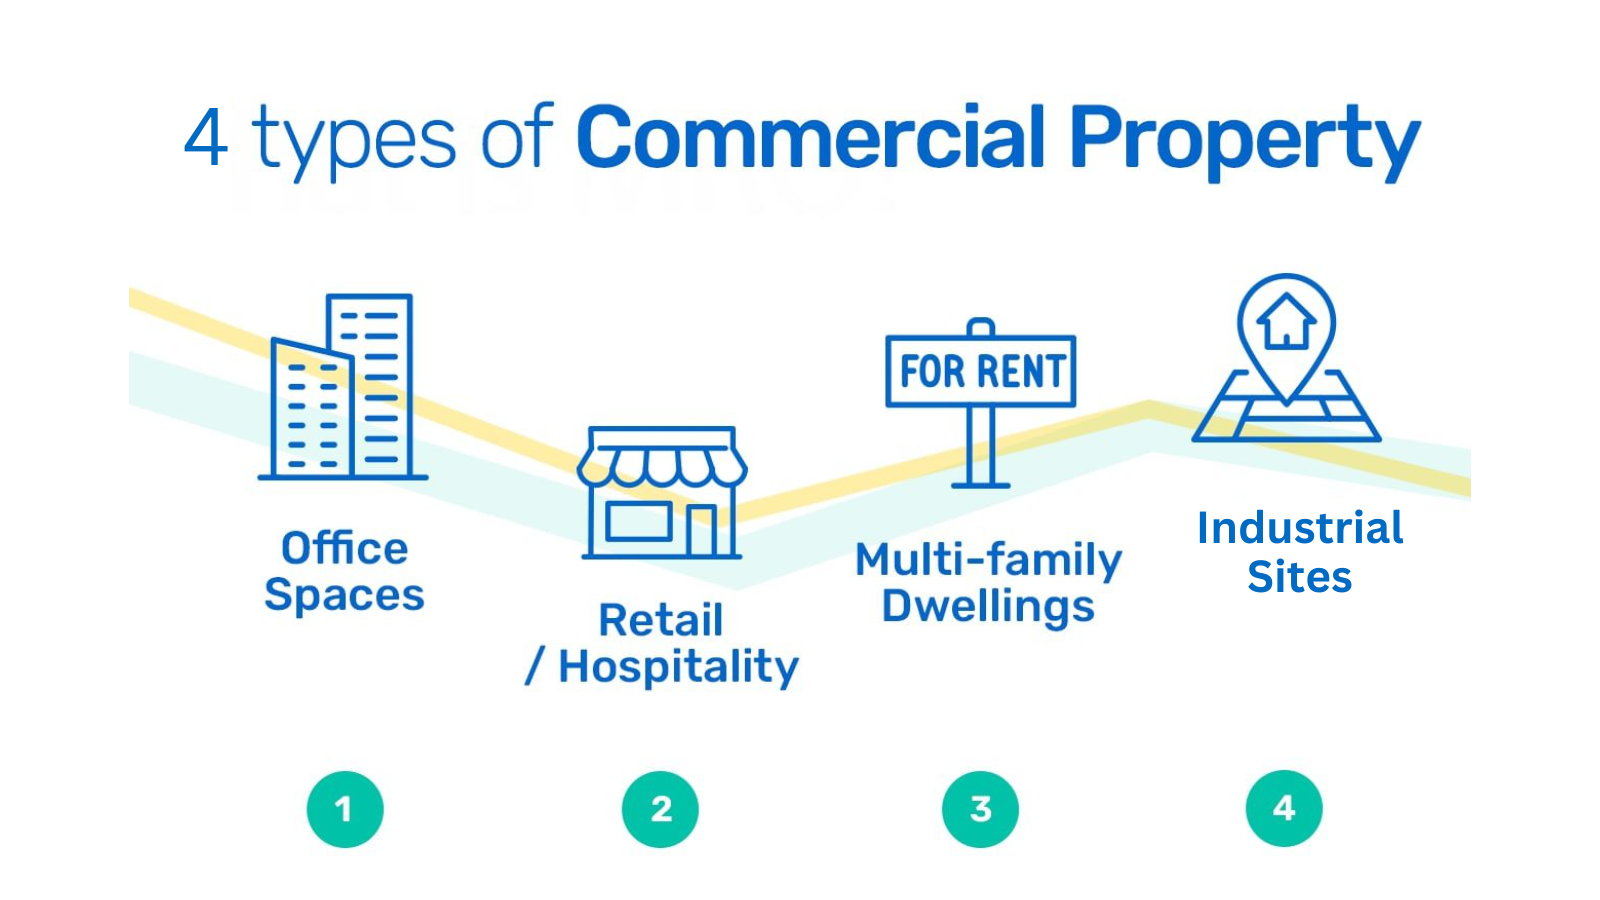 Types of Commercial Properties